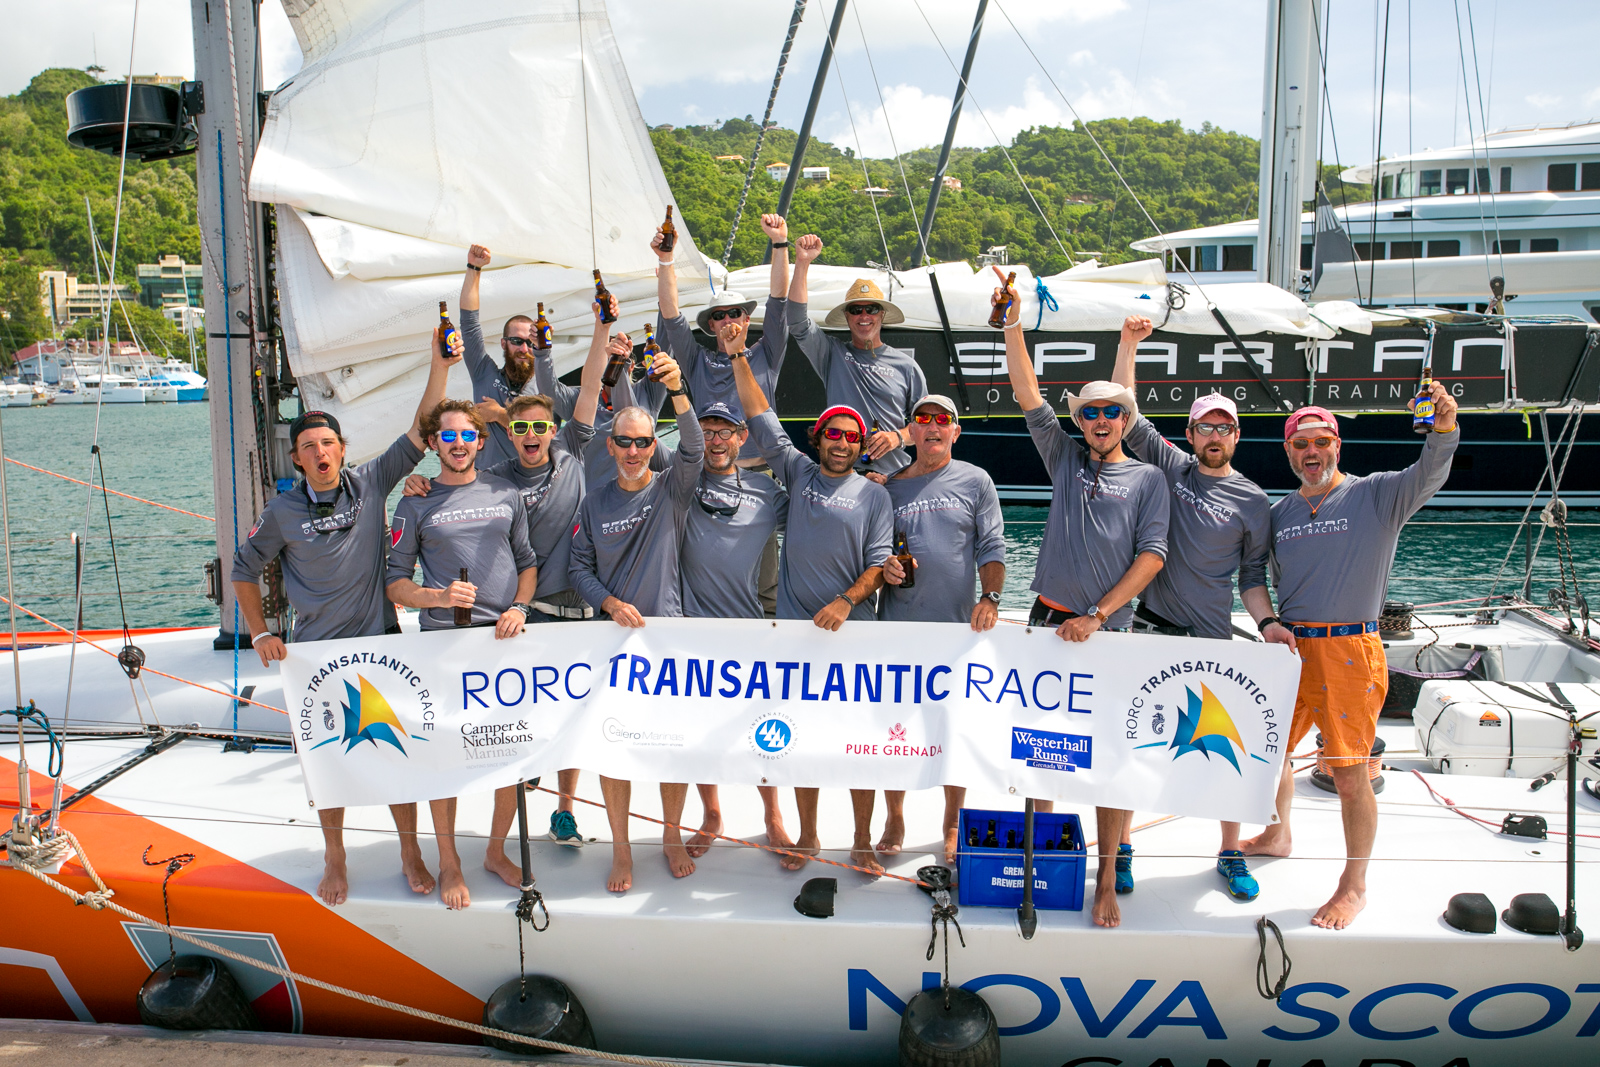 What an achievement. "We've crossed the Atlantic!" Cheers on the dock as the crew of the Nova Scotia-Based sail training vessel, Challenger complete the RORC Transatlantic Race from Lanzarote to Grenada in 18 days © RORC/Arthur Daniel